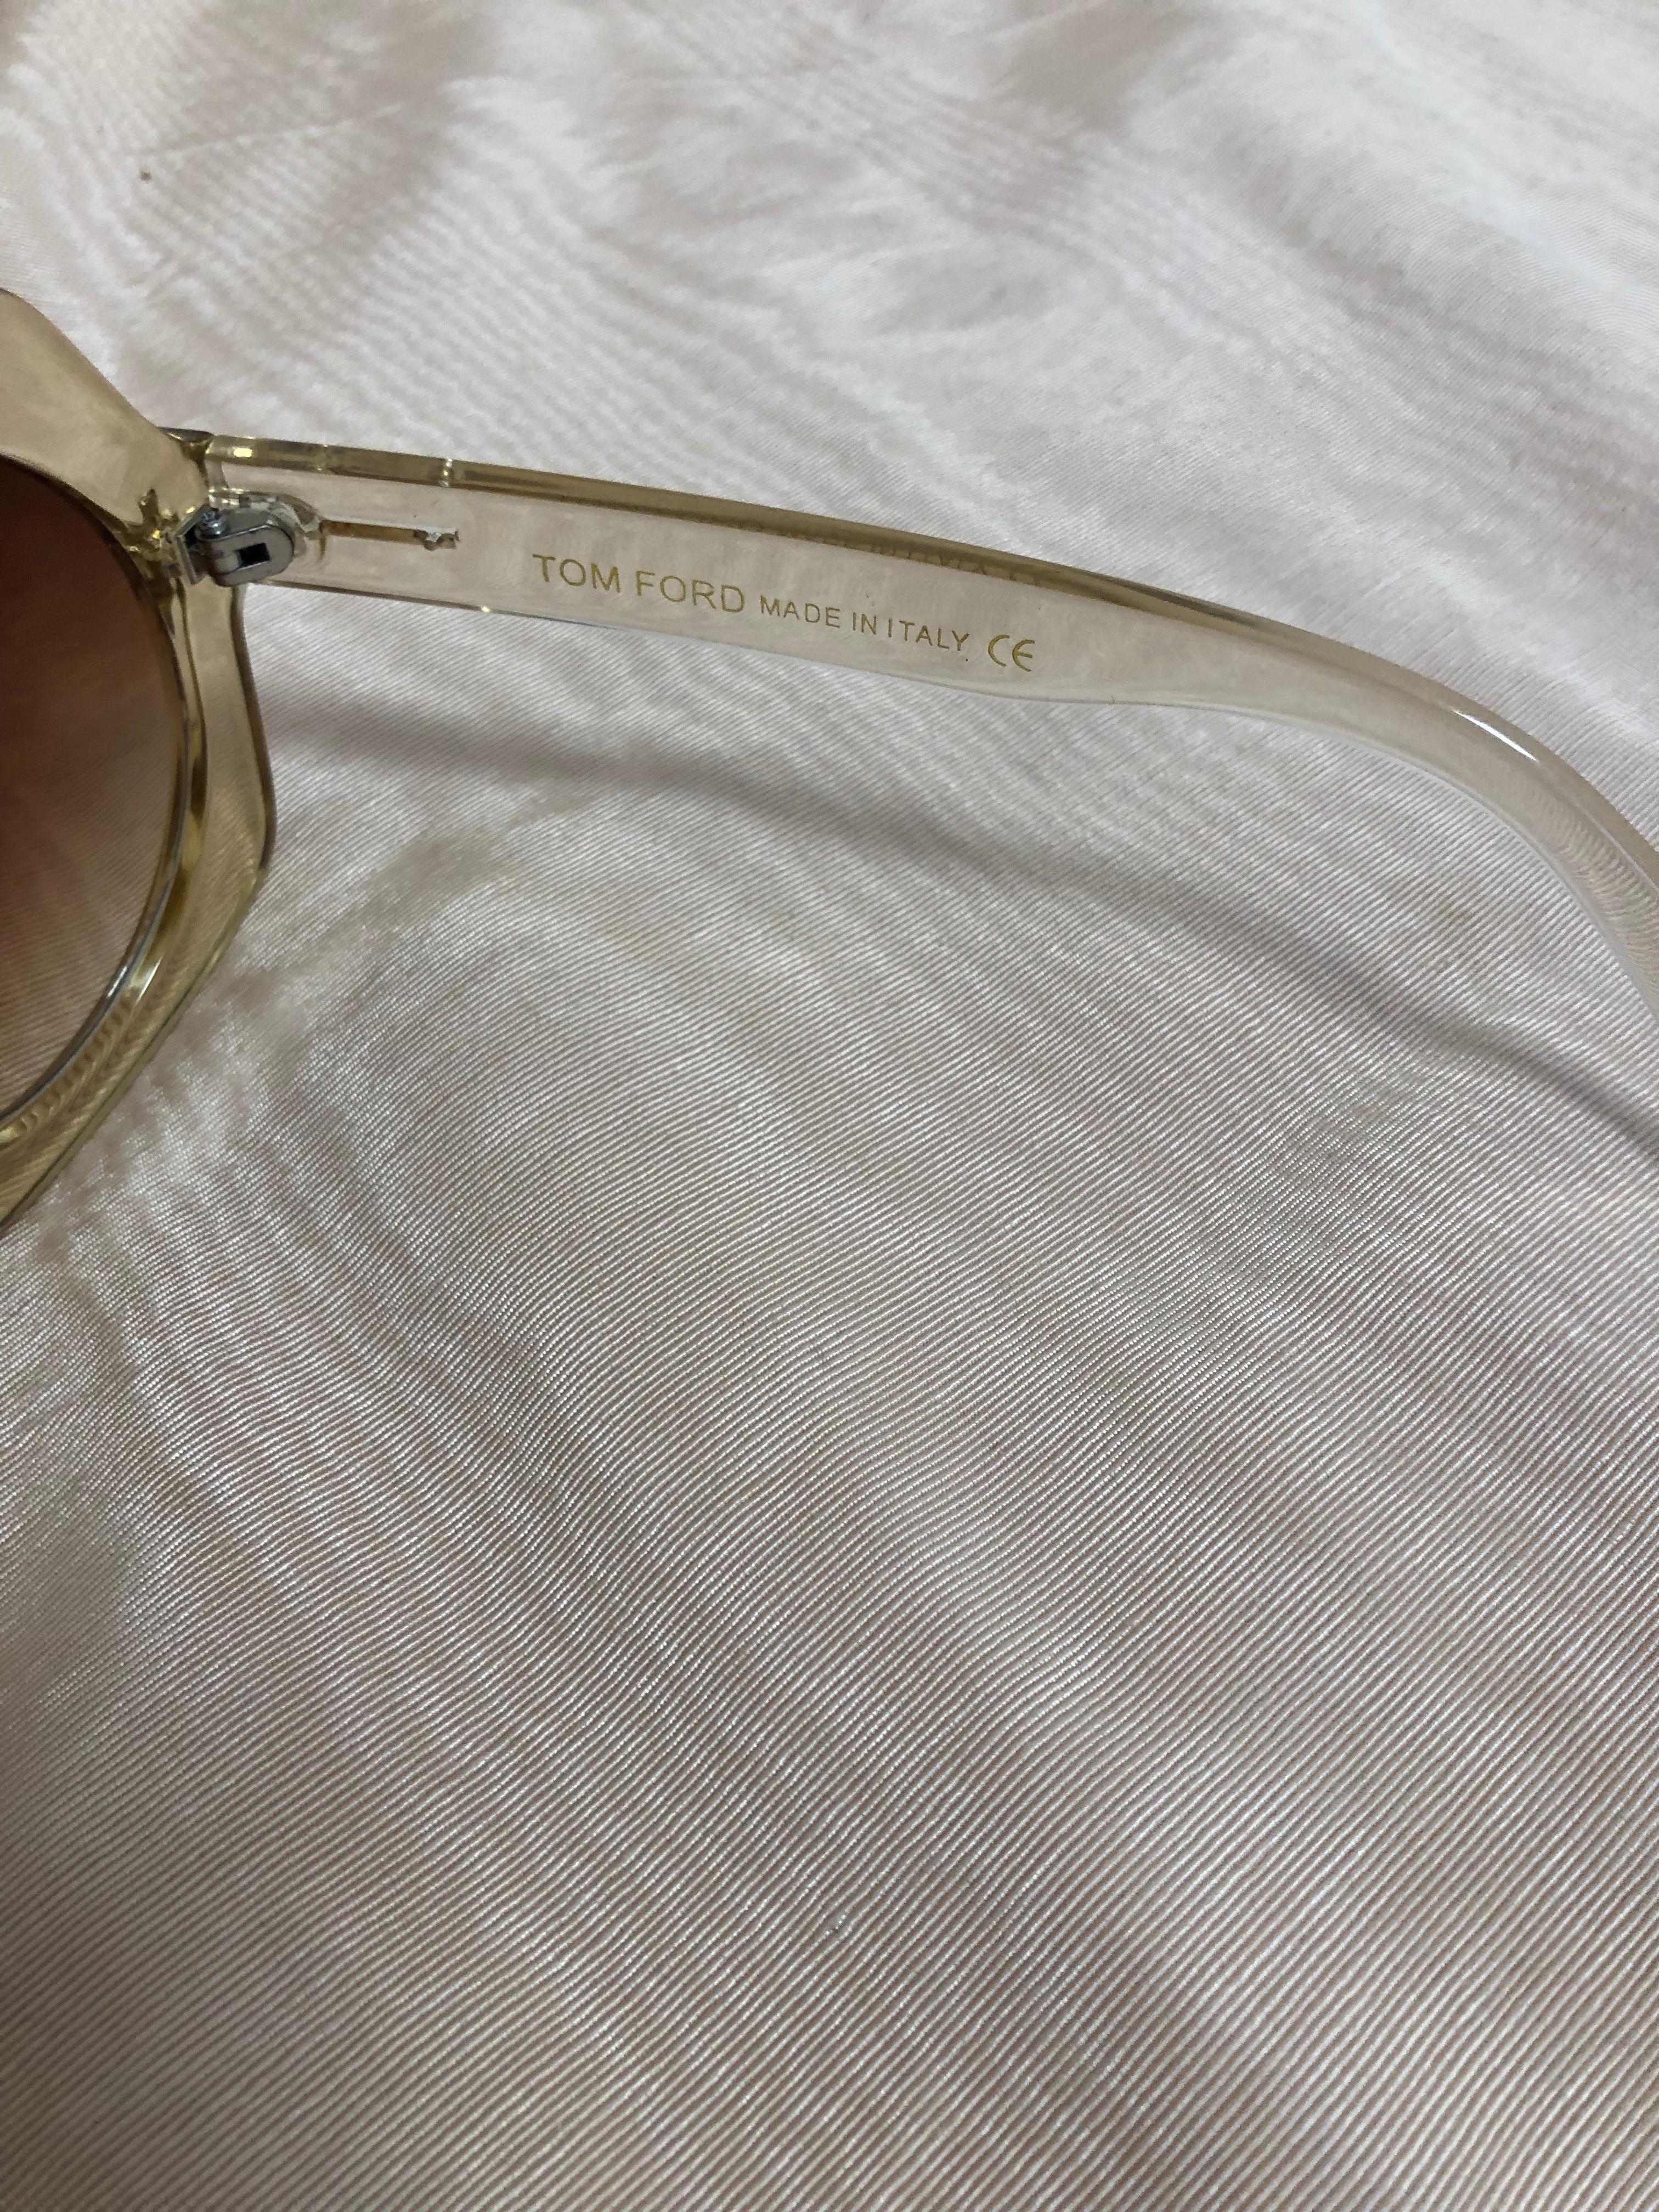 Brown Tom Ford Sofia Sunglasses FT 0535 in Pale Gold Tone Never Worn w/Case and Box